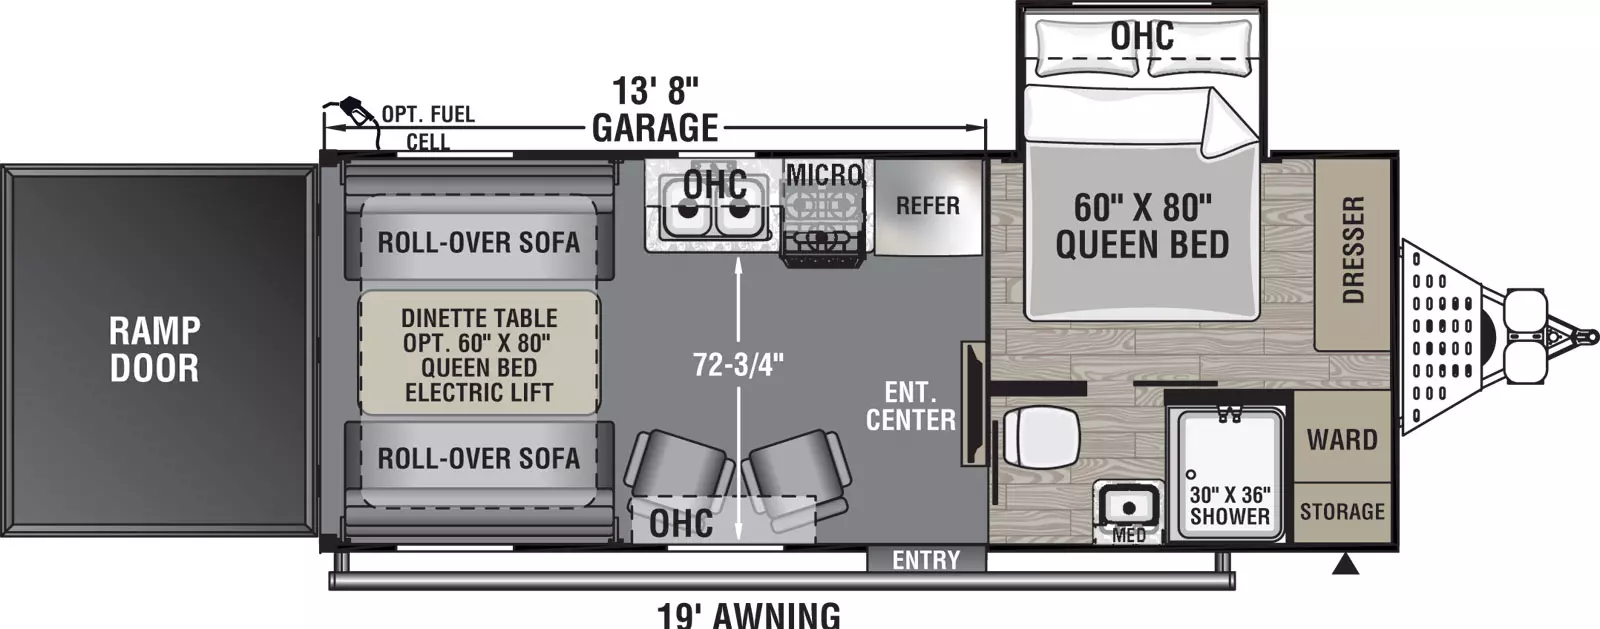 The 21LT has one slide out on the off door side and one entry door on the door side. Interior layout from front to back: front bedroom with a foot facing queen bed in an off-door side slide out, dresser, and wardrobe; bathroom on door side; kitchen living dining area; off-door side kitchen containing double basin sink, overhead cabinet, cook top stove, overhead microwave, and refrigerator; entertainment center; two euro recliner chairs with cabinets overhead on the door side; roll-over sofa on door side and off door side of the unit; dinette table; and rear ramp door.